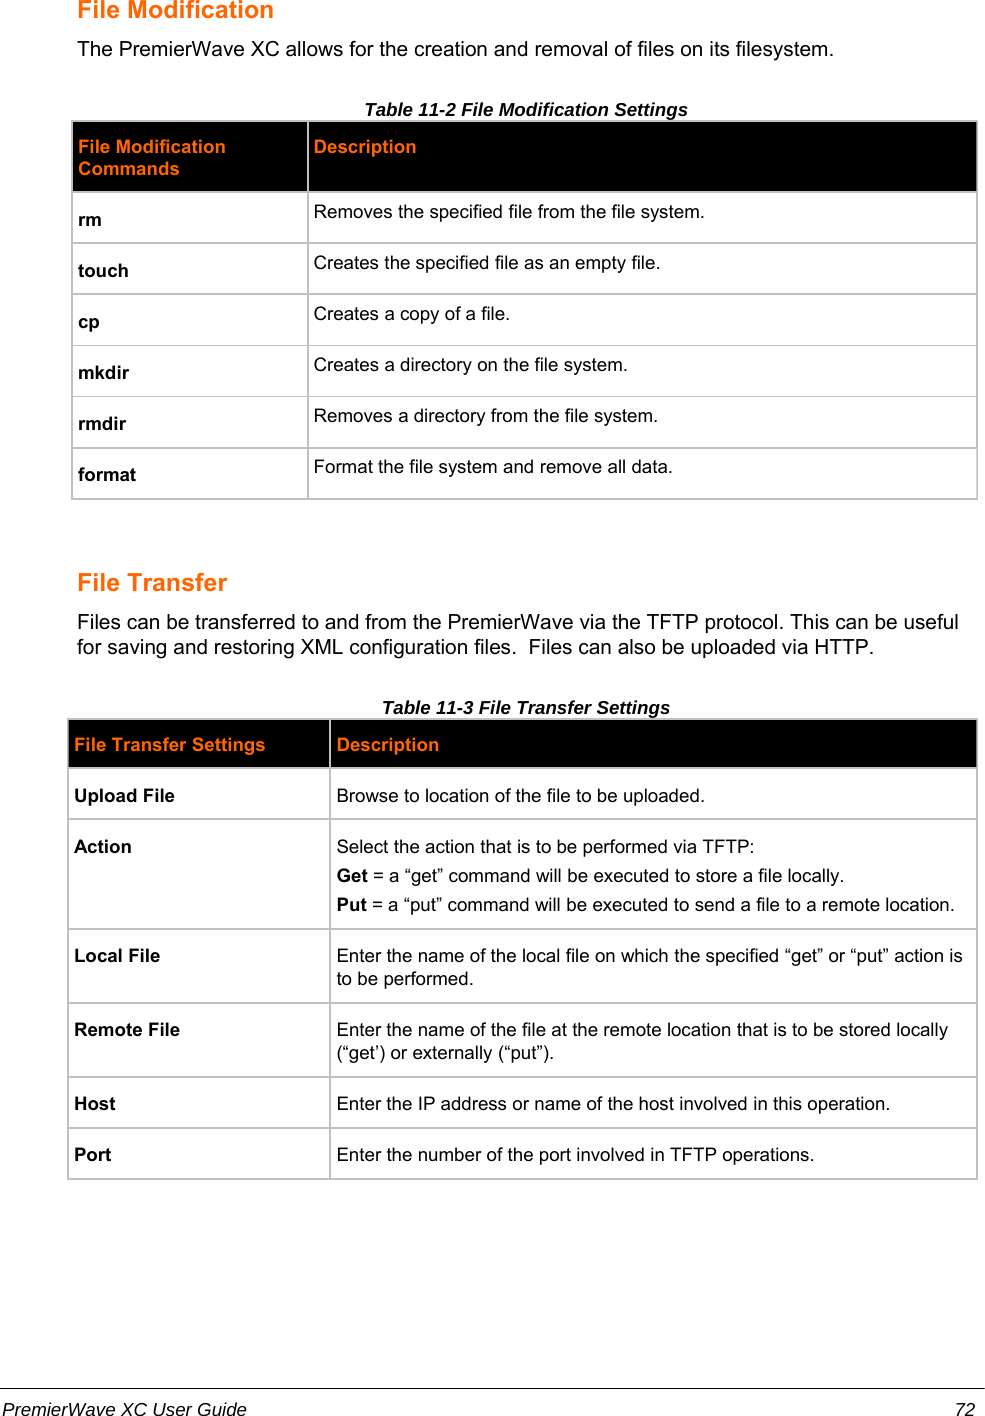 File ModificationThe PremierWave XC allows for the creation and removal of files on its filesystem.Table 11-2 File Modification SettingsFile ModificationCommandsDescriptionrm Removes the specified file from the file system.touch Creates the specified file as an empty file.cp Creates a copy of a file.mkdir Creates a directory on the file system.rmdir Removes a directory from the file system.format Format the file system and remove all data.File Transfer Files can be transferred to and from the PremierWave via the TFTP protocol. This can be usefulfor saving and restoring XML configuration files.  Files can also be uploaded via HTTP.Table 11-3 File Transfer SettingsFile Transfer Settings DescriptionUpload File Browse to location of the file to be uploaded.  Action Select the action that is to be performed via TFTP:Get = a “get” command will be executed to store a file locally.Put = a “put” command will be executed to send a file to a remote location.Local File Enter the name of the local file on which the specified “get” or “put” action isto be performed.Remote File Enter the name of the file at the remote location that is to be stored locally(“get’) or externally (“put”).Host Enter the IP address or name of the host involved in this operation.Port Enter the number of the port involved in TFTP operations.PremierWave XC User Guide 72